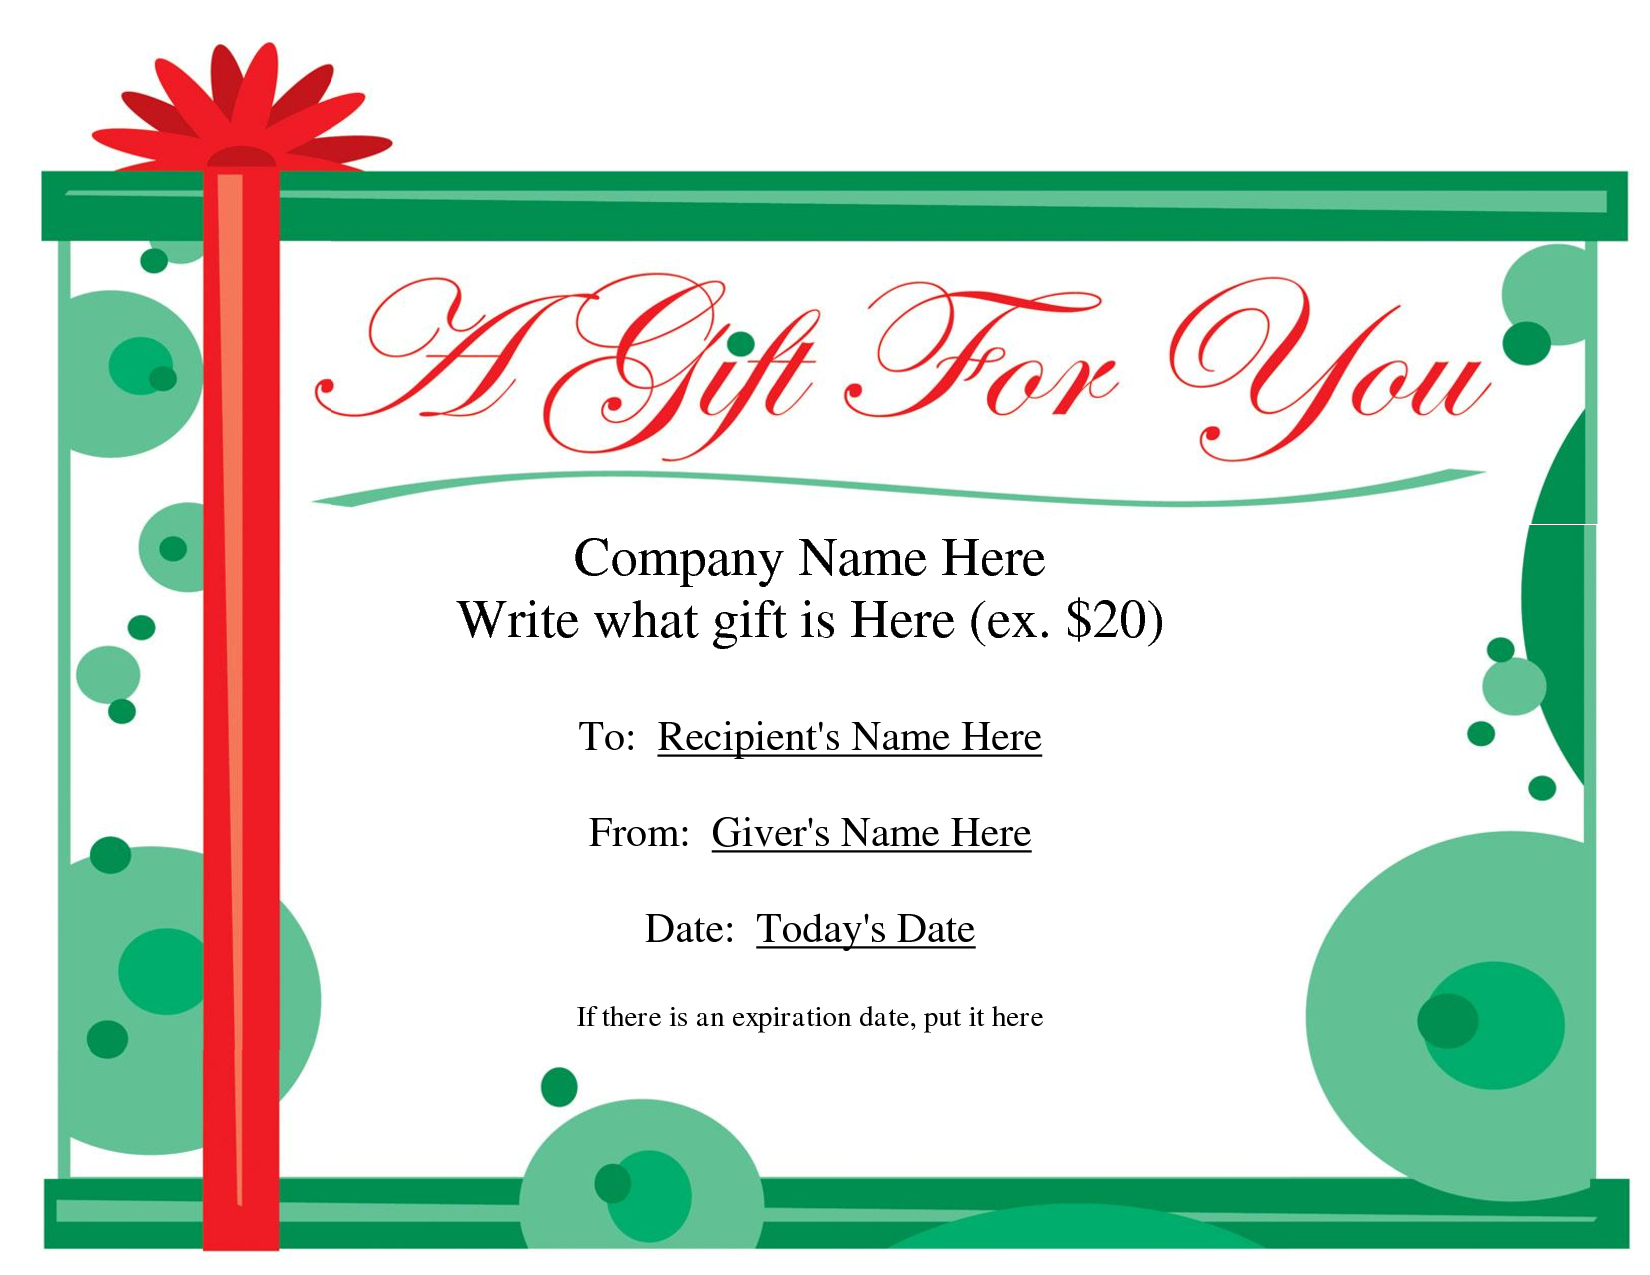 Free Printable Gift Certificate Template | Free Christmas Regarding Free Christmas Gift Certificate Templates